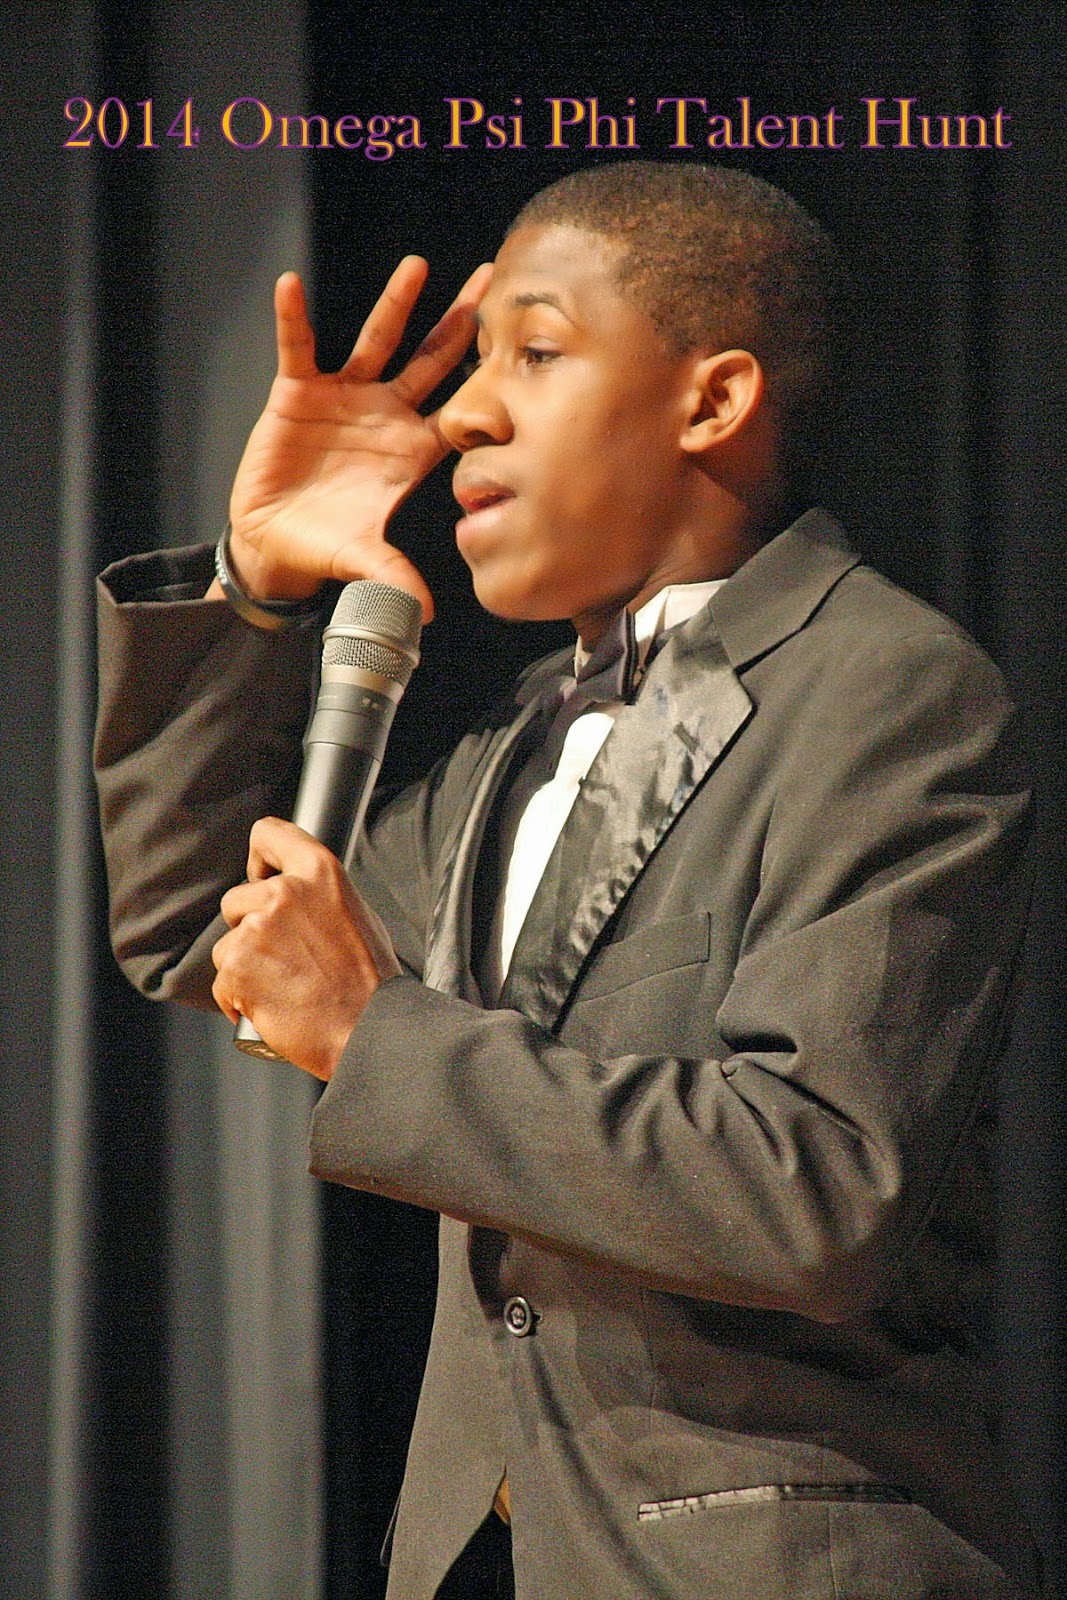 omega-psi-phi-talent-hunt-gamma-xi-chapter-photos-from-the-2014-talent-hunt